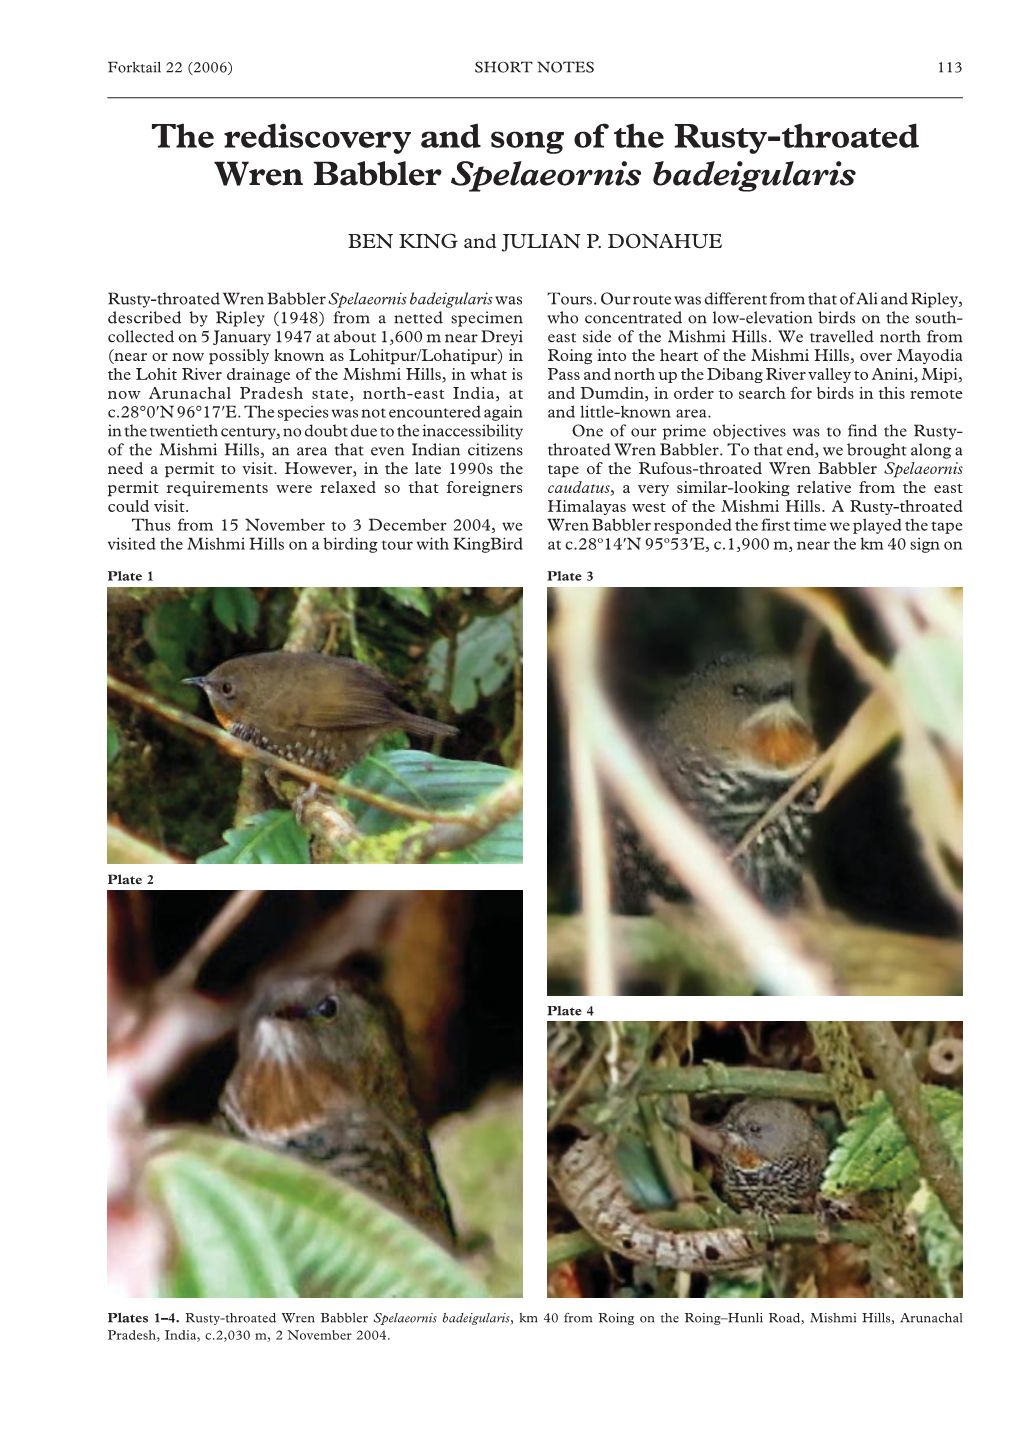 The Rediscovery and Song of the Rusty-Throated Wren Babbler Spelaeornis Badeigularis